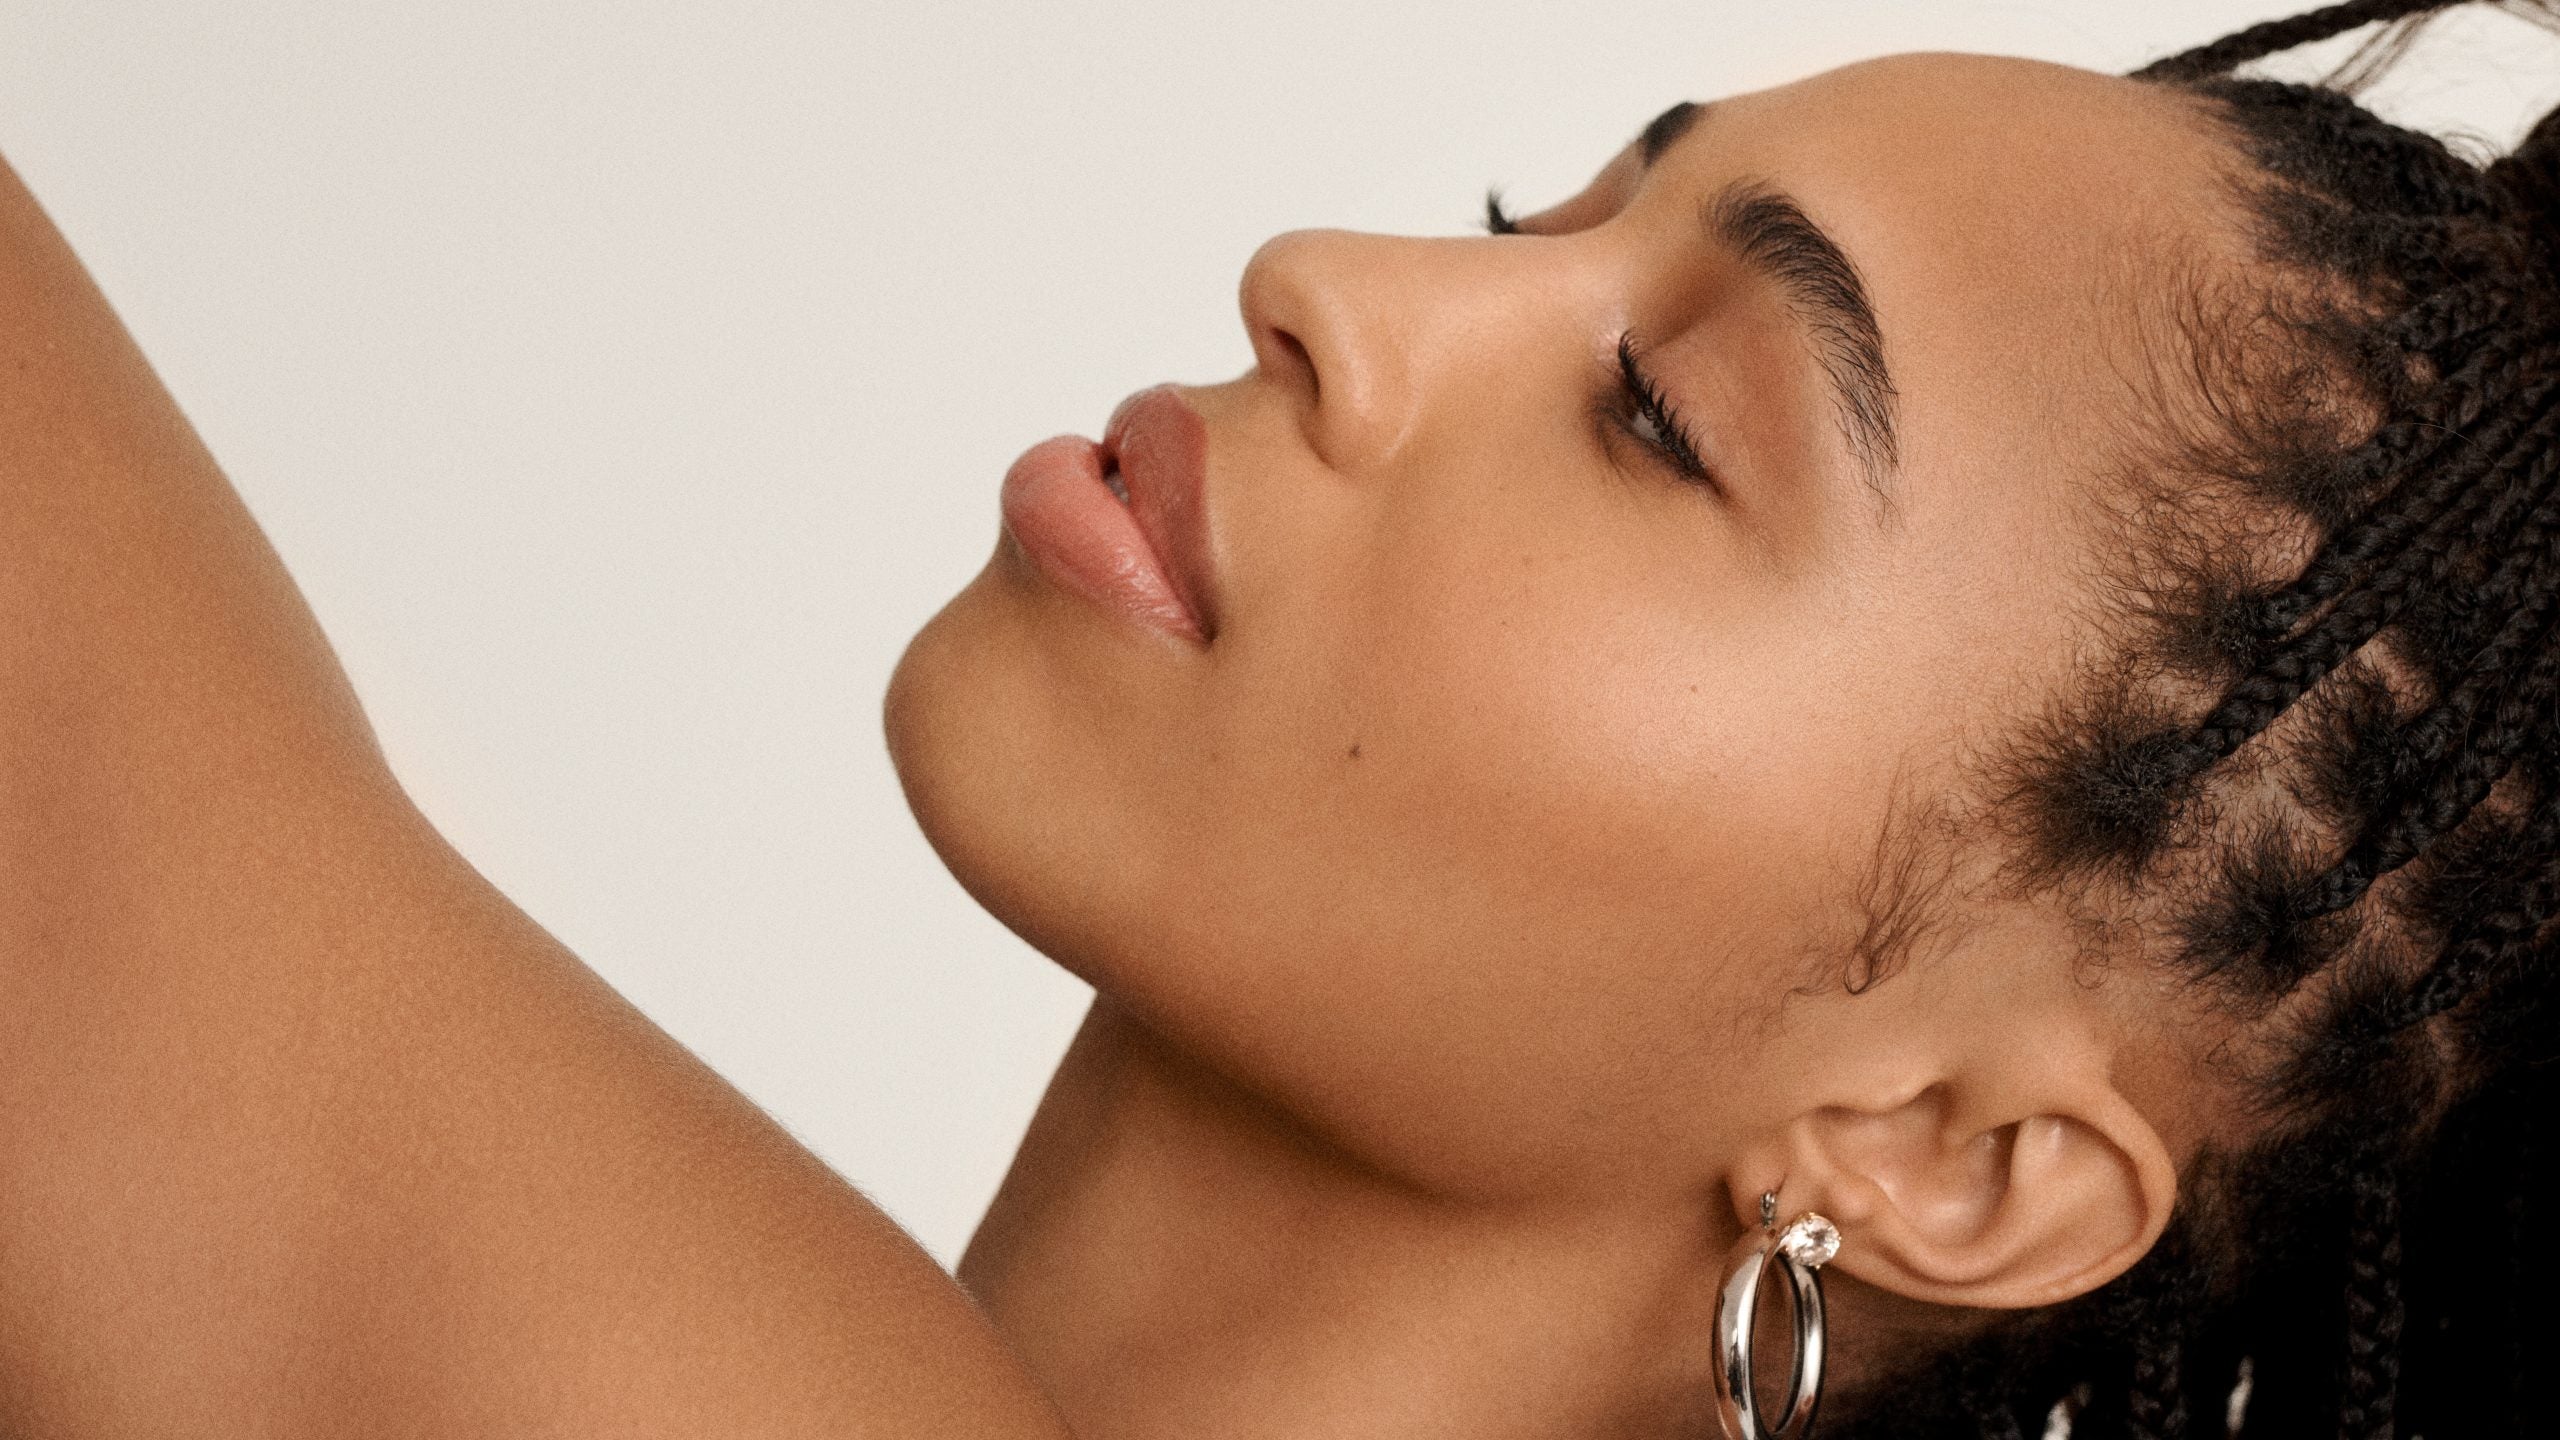 Glossier Leading In Inclusive Beauty With WNBA Partnership